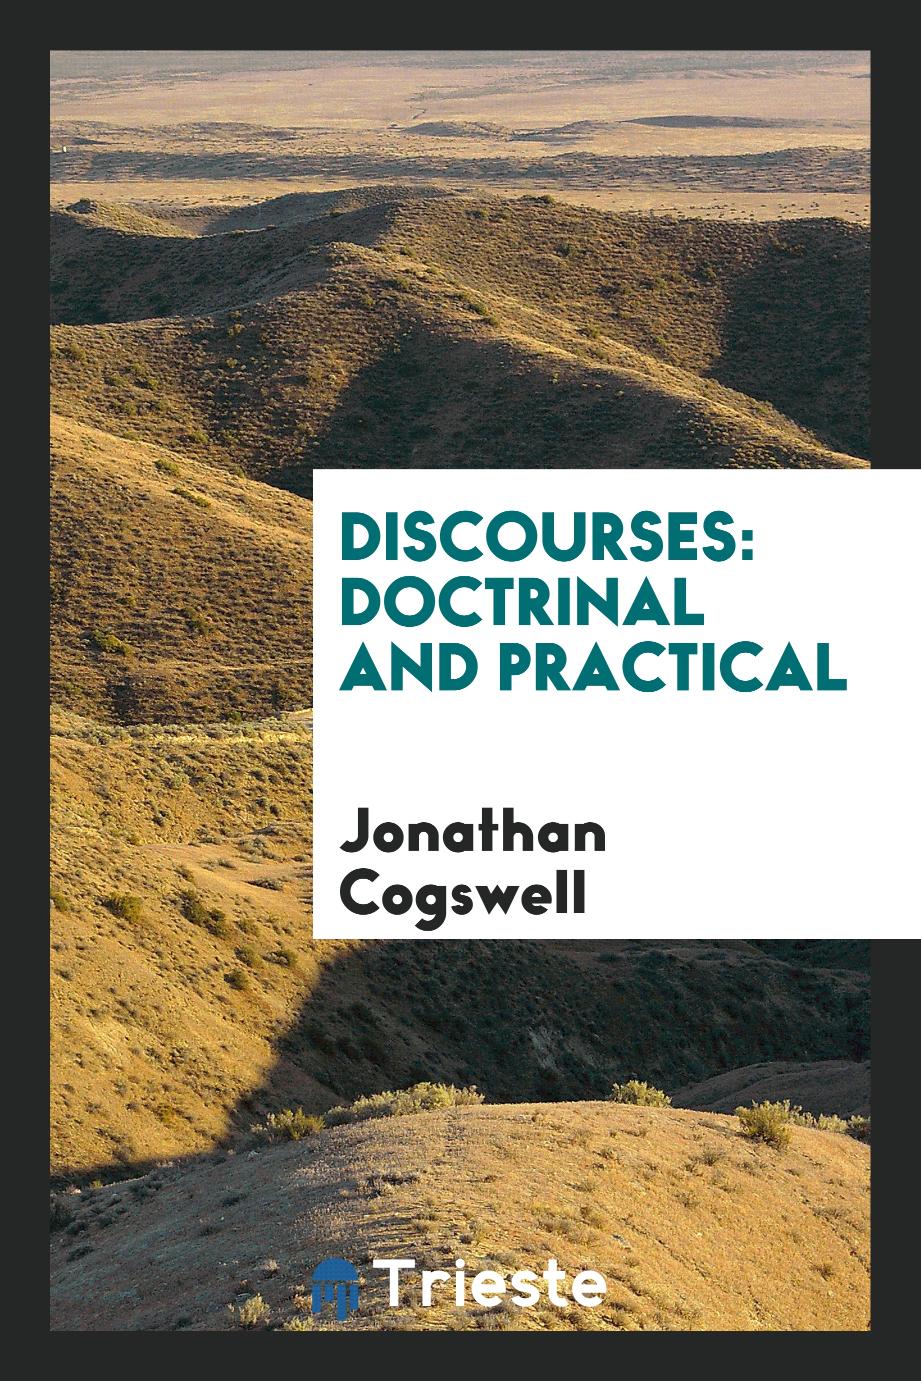 Discourses: doctrinal and practical